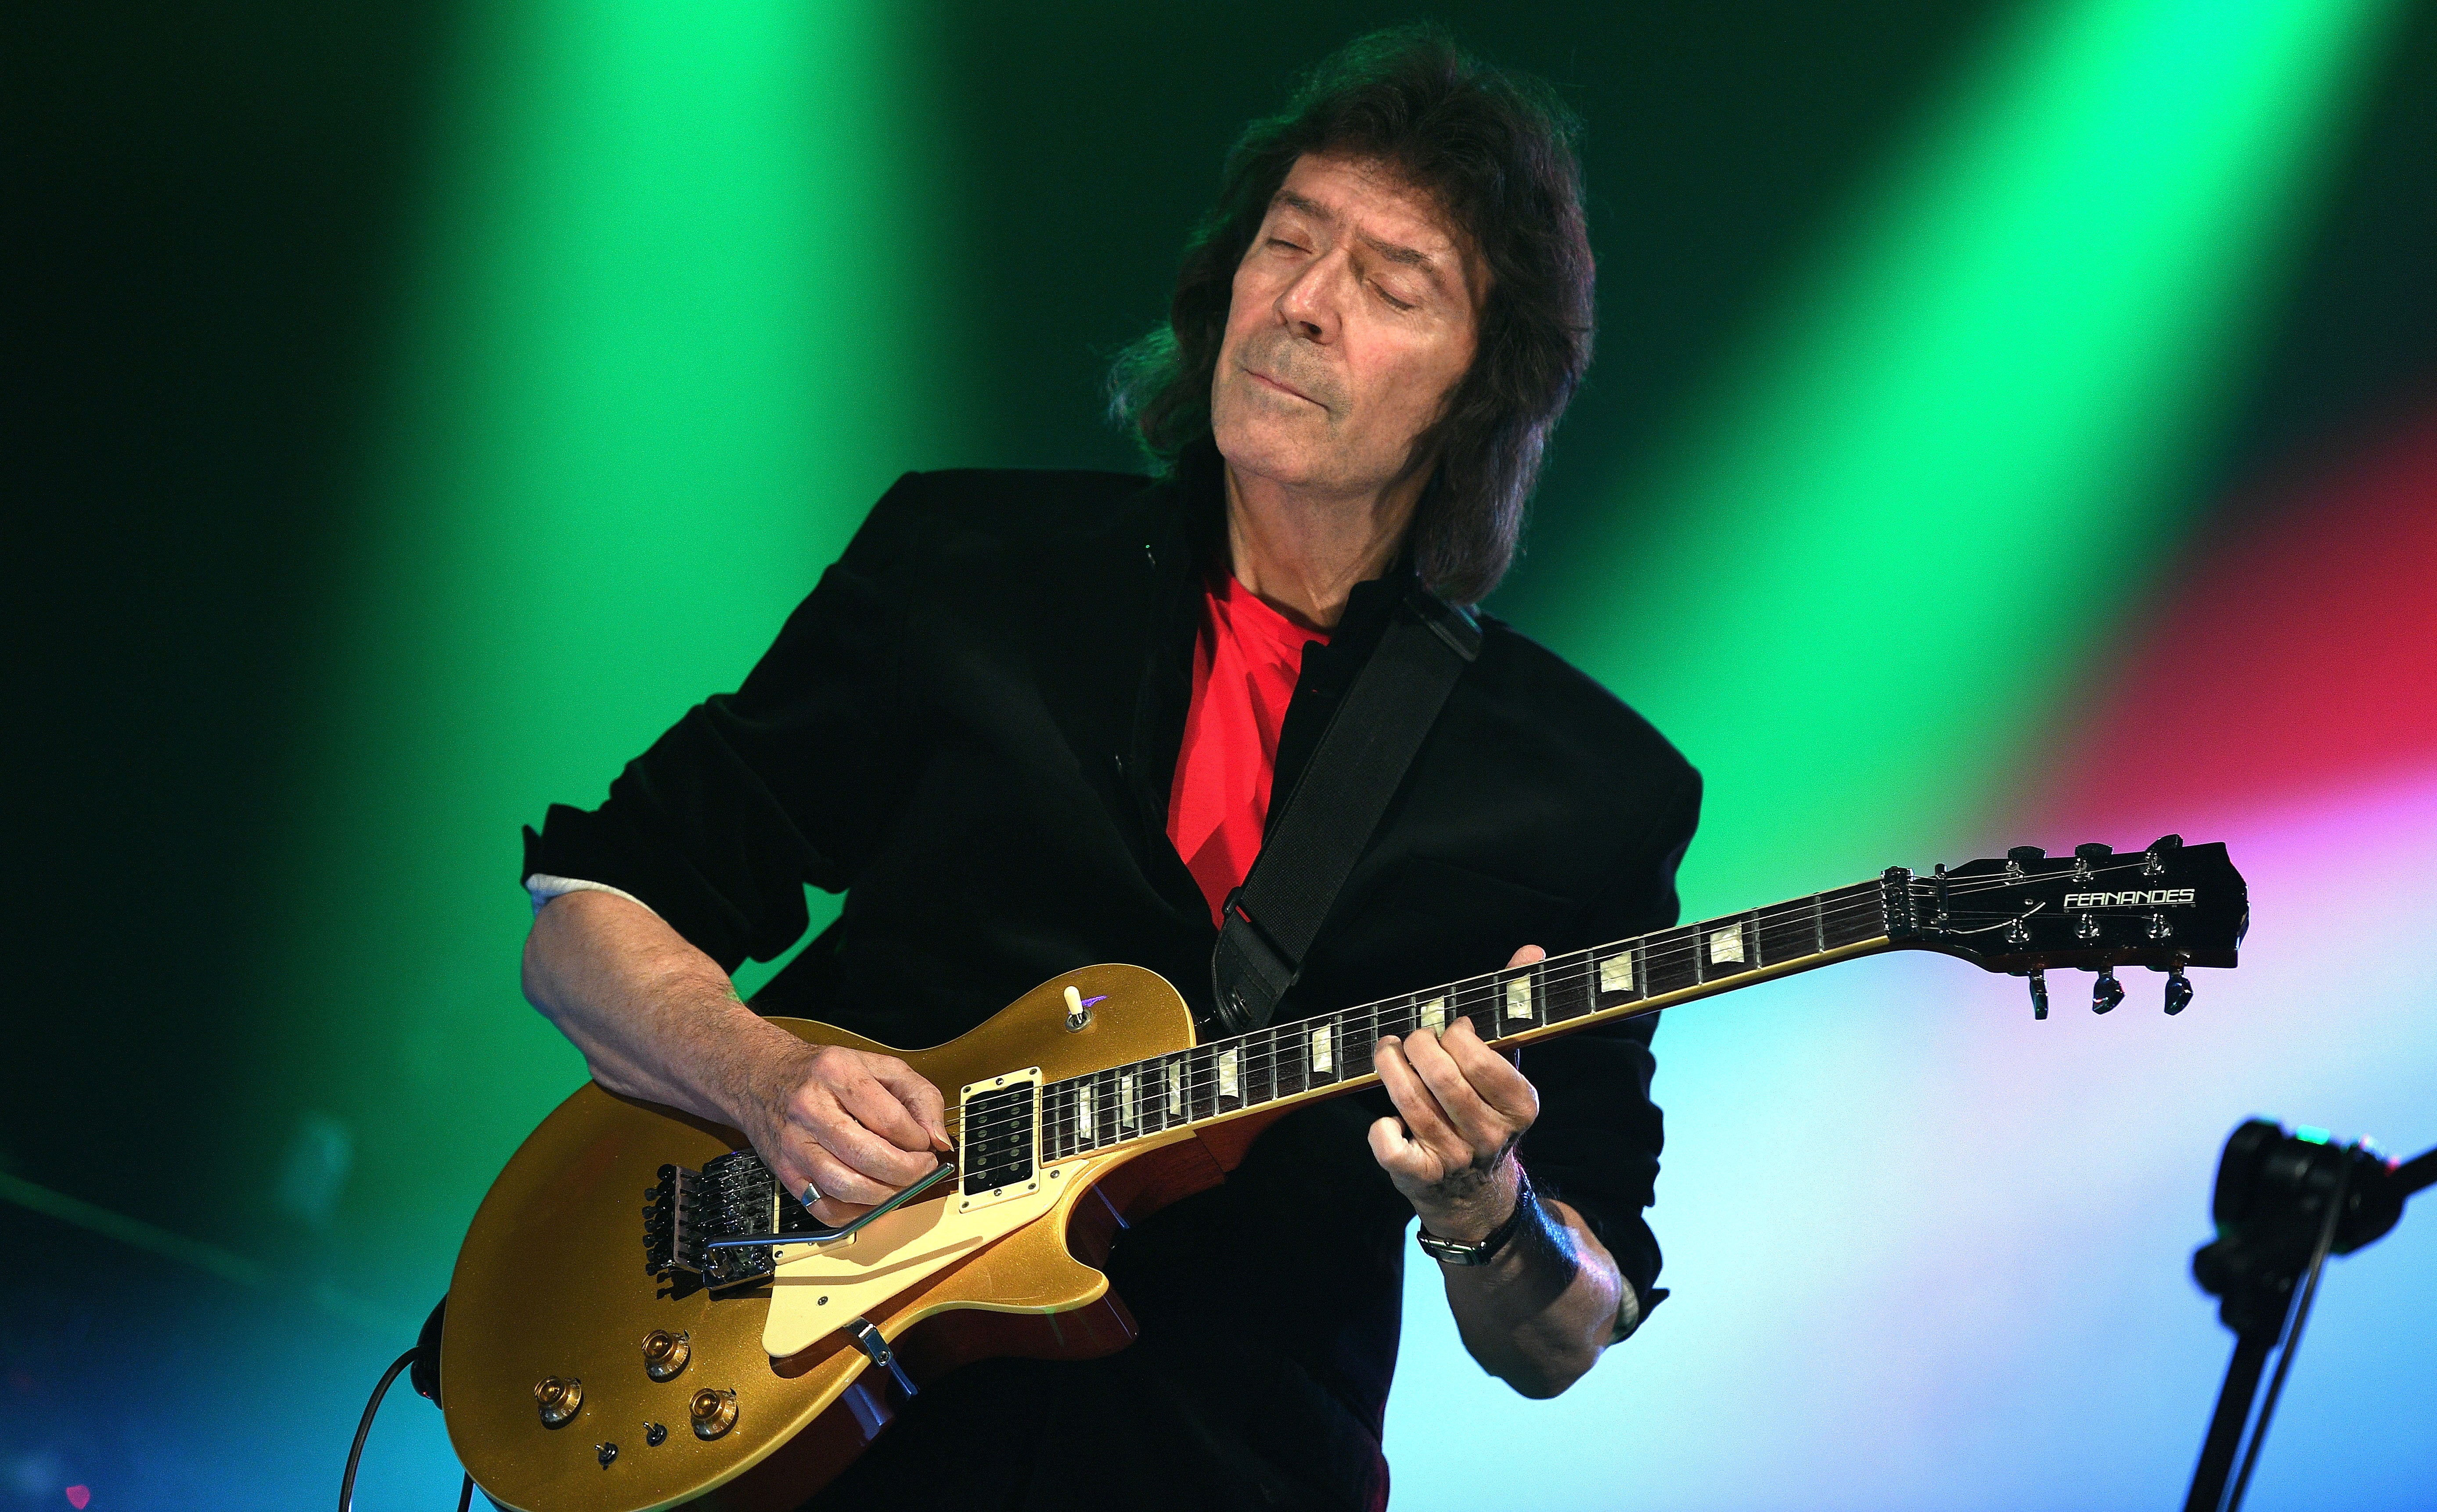 new presale password for An Evening with Steve Hackett: Genesis Revisited, Foxtrot at 50 & More advanced tickets in Seattle